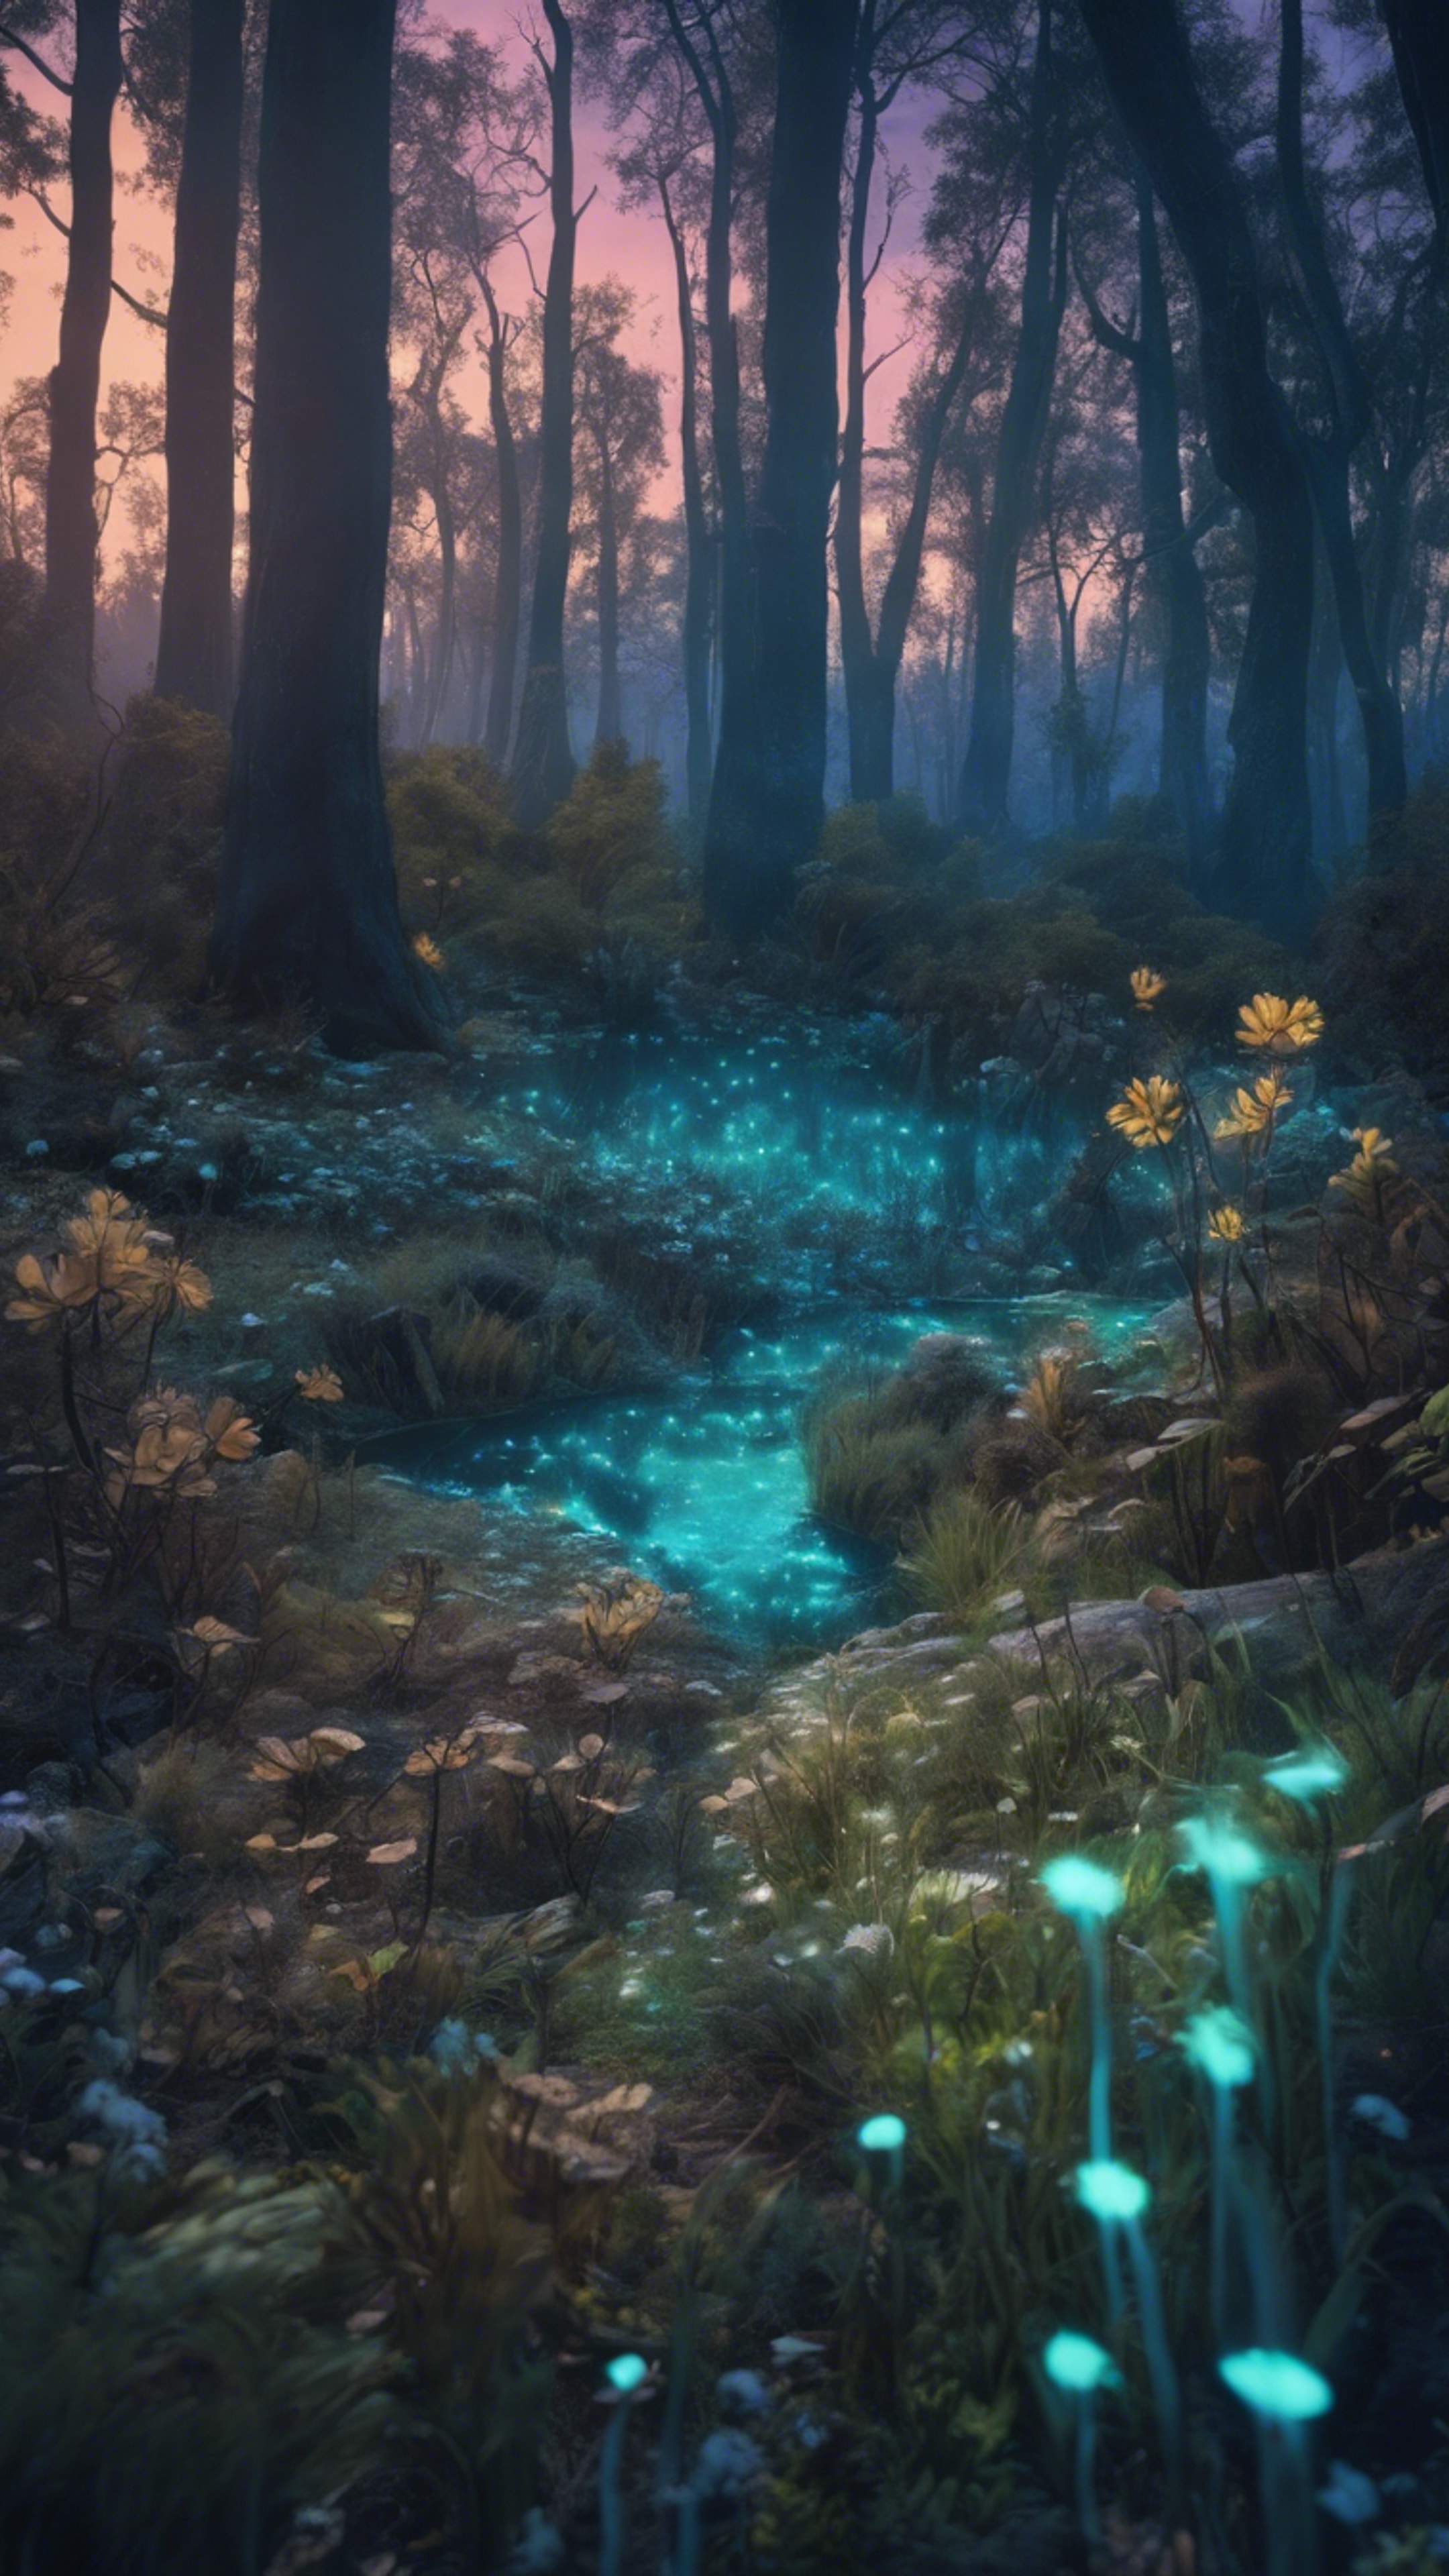 A magical landscape with bioluminescent flora and fauna, painting a beautifully eerie picture within a twilight forest. Wallpaper[f4bdf3edf4f4493b8357]